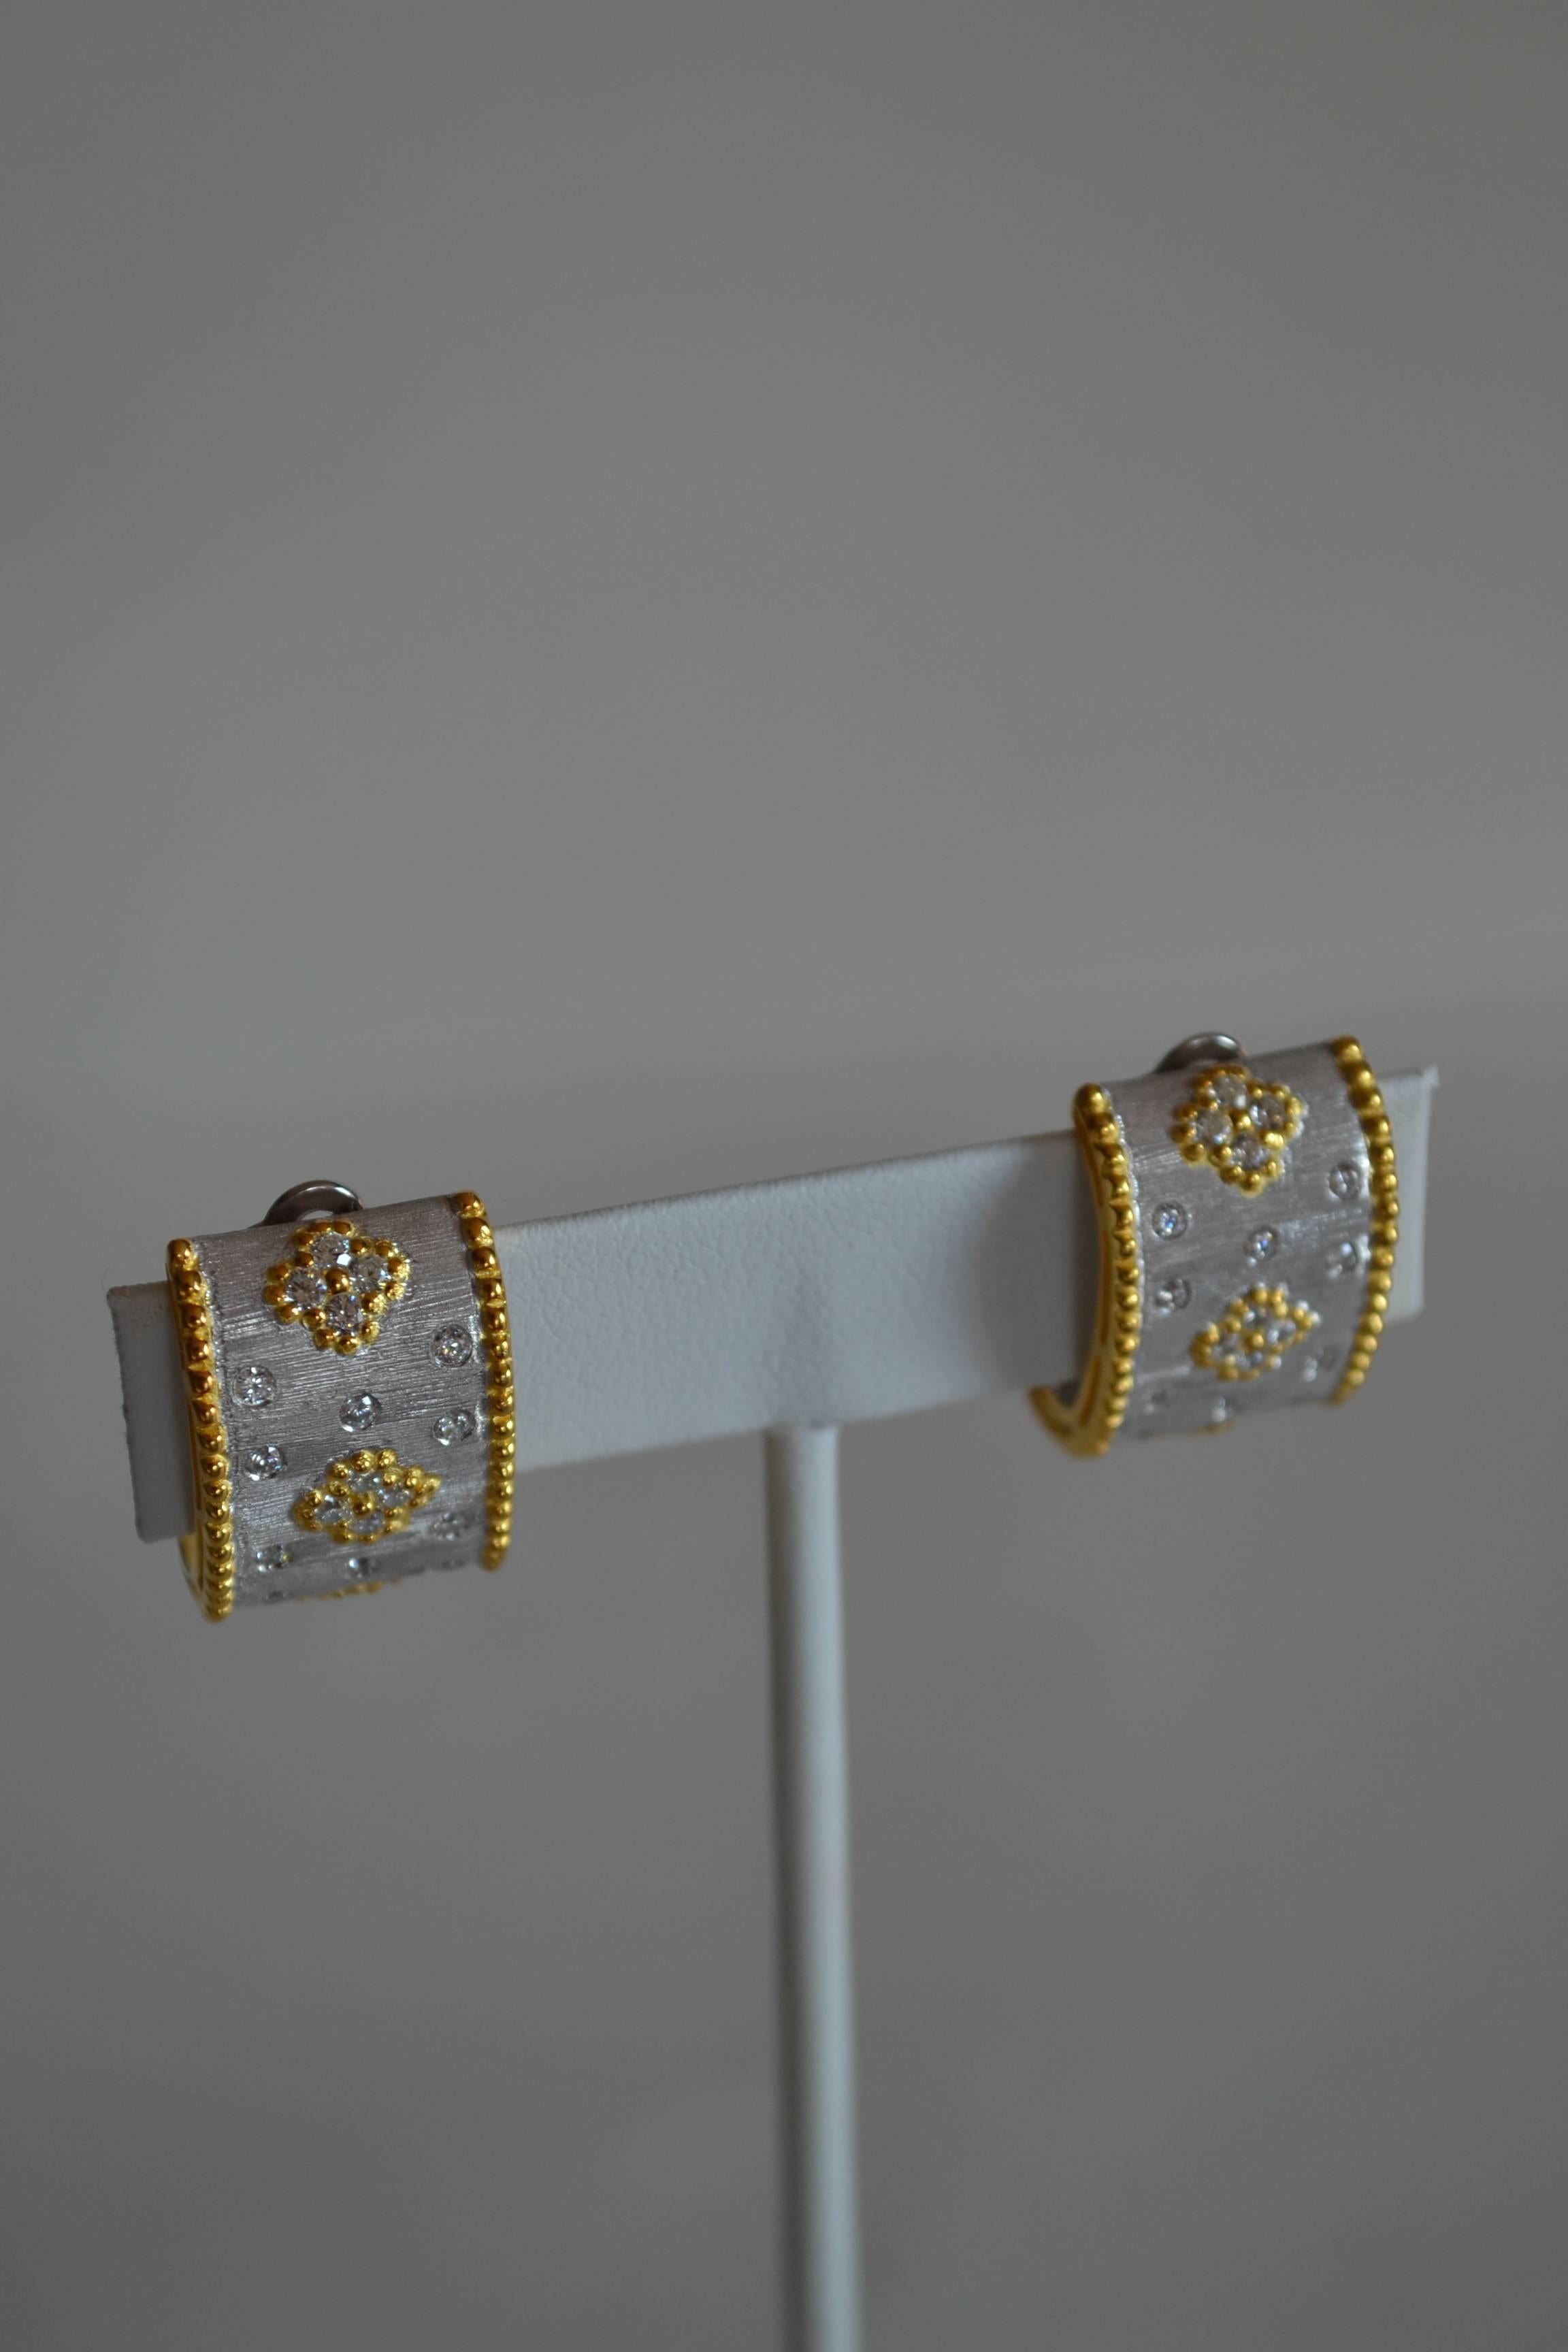 CZ clover pattern C shape clip earrings in gold and rhodium plate from Bijoux Num. 

1